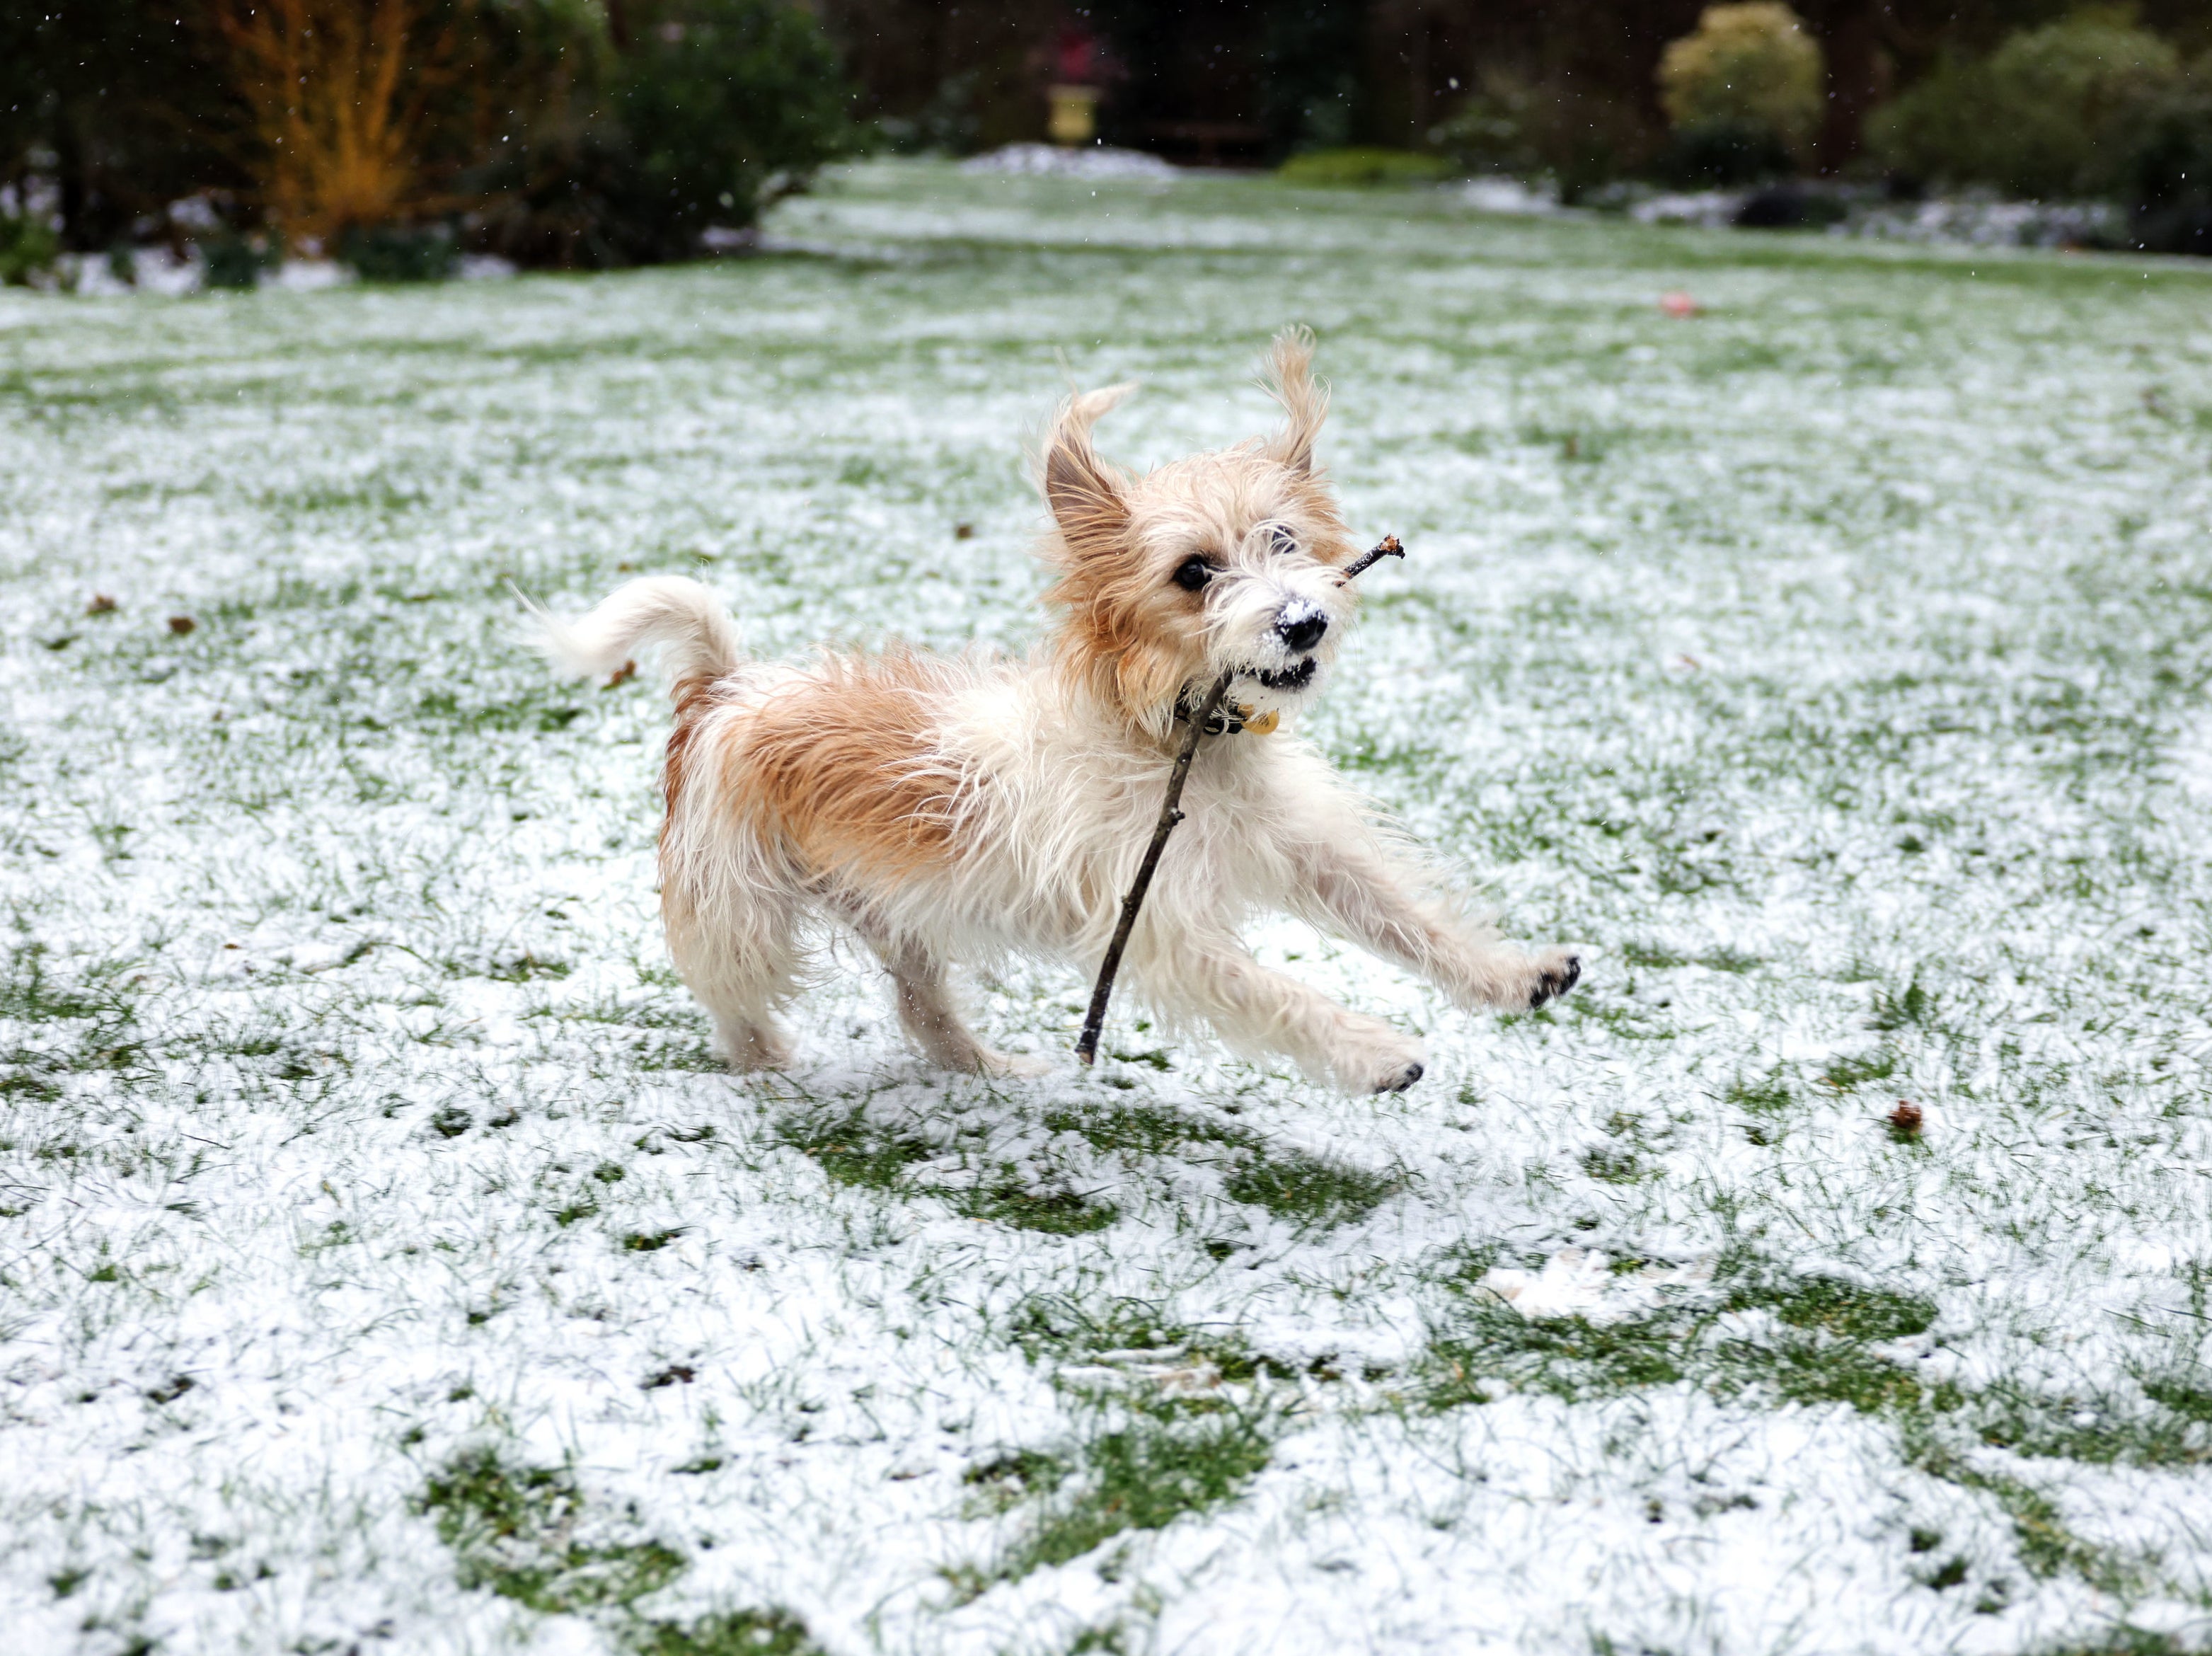 Dilyn the dog playing in the snow at 10 Downing Street, London. Pictures of the dog were taken by Pippa Fowles, a Ministry of Defence photographer seconded to No 10.